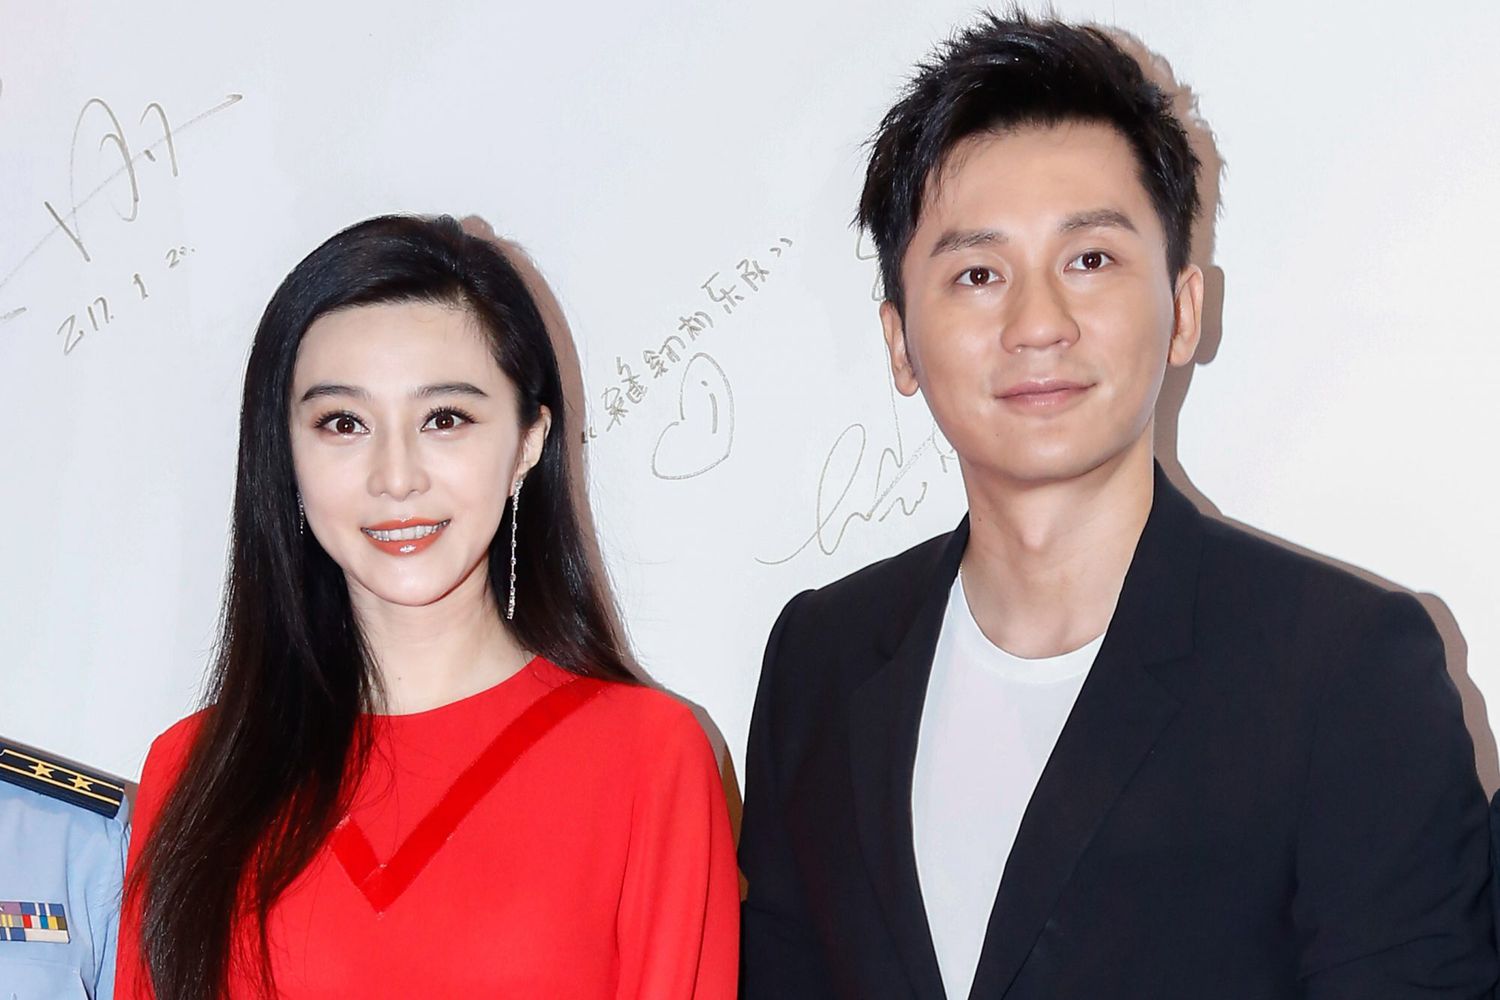 <p>Fan Bingbing, the Chinese star who mysteriously disappeared from the public eye last year, split from her fianc&eacute;, actor Li Chen.</p>
                            <p>The actress confirmed the news on her Weibo page, which has been translated to English, on June 27.</p>
                            <p>"People's life may experience various farewells," Fan wrote. "The love and warmth that we have gained in our encounters are turned into eternal power. Thank you for all your giving, support and love. Thank you for your care and love in the future."</p>
                            <p>She added, "We are no longer us, we are still us."</p>
                            <p>Fan and Li announced their engagement in September 2017 after the actor proposed at her birthday party.</p>
                            